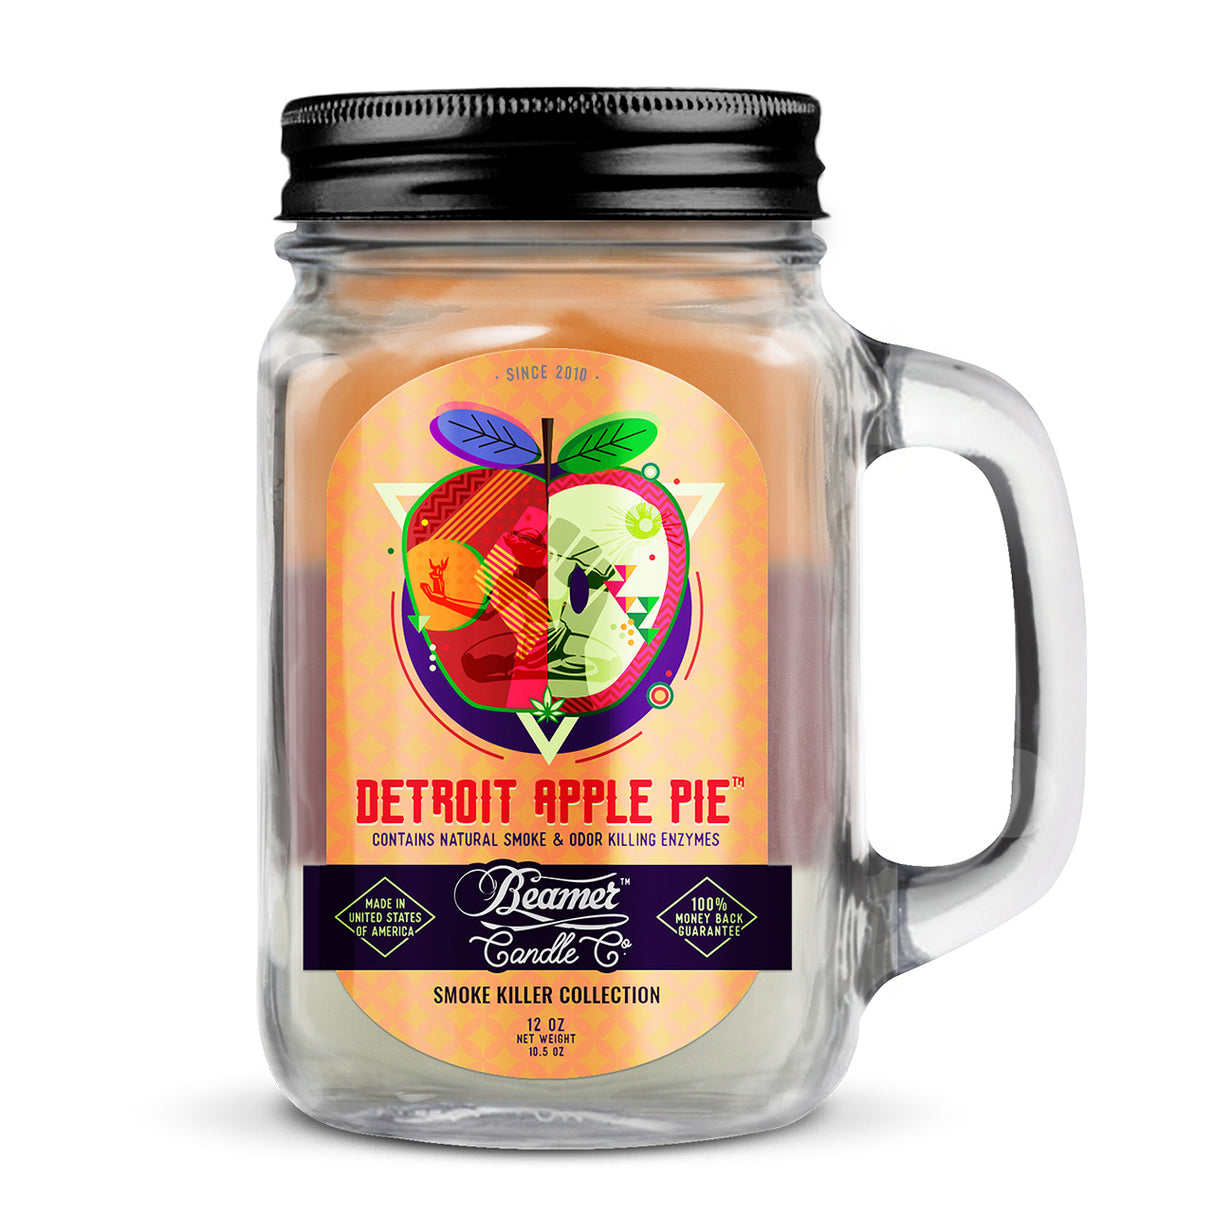 Beamer Candle Co. Detroit Apple Pie (12 oz) | Top of the Galaxy Smoke Shop.